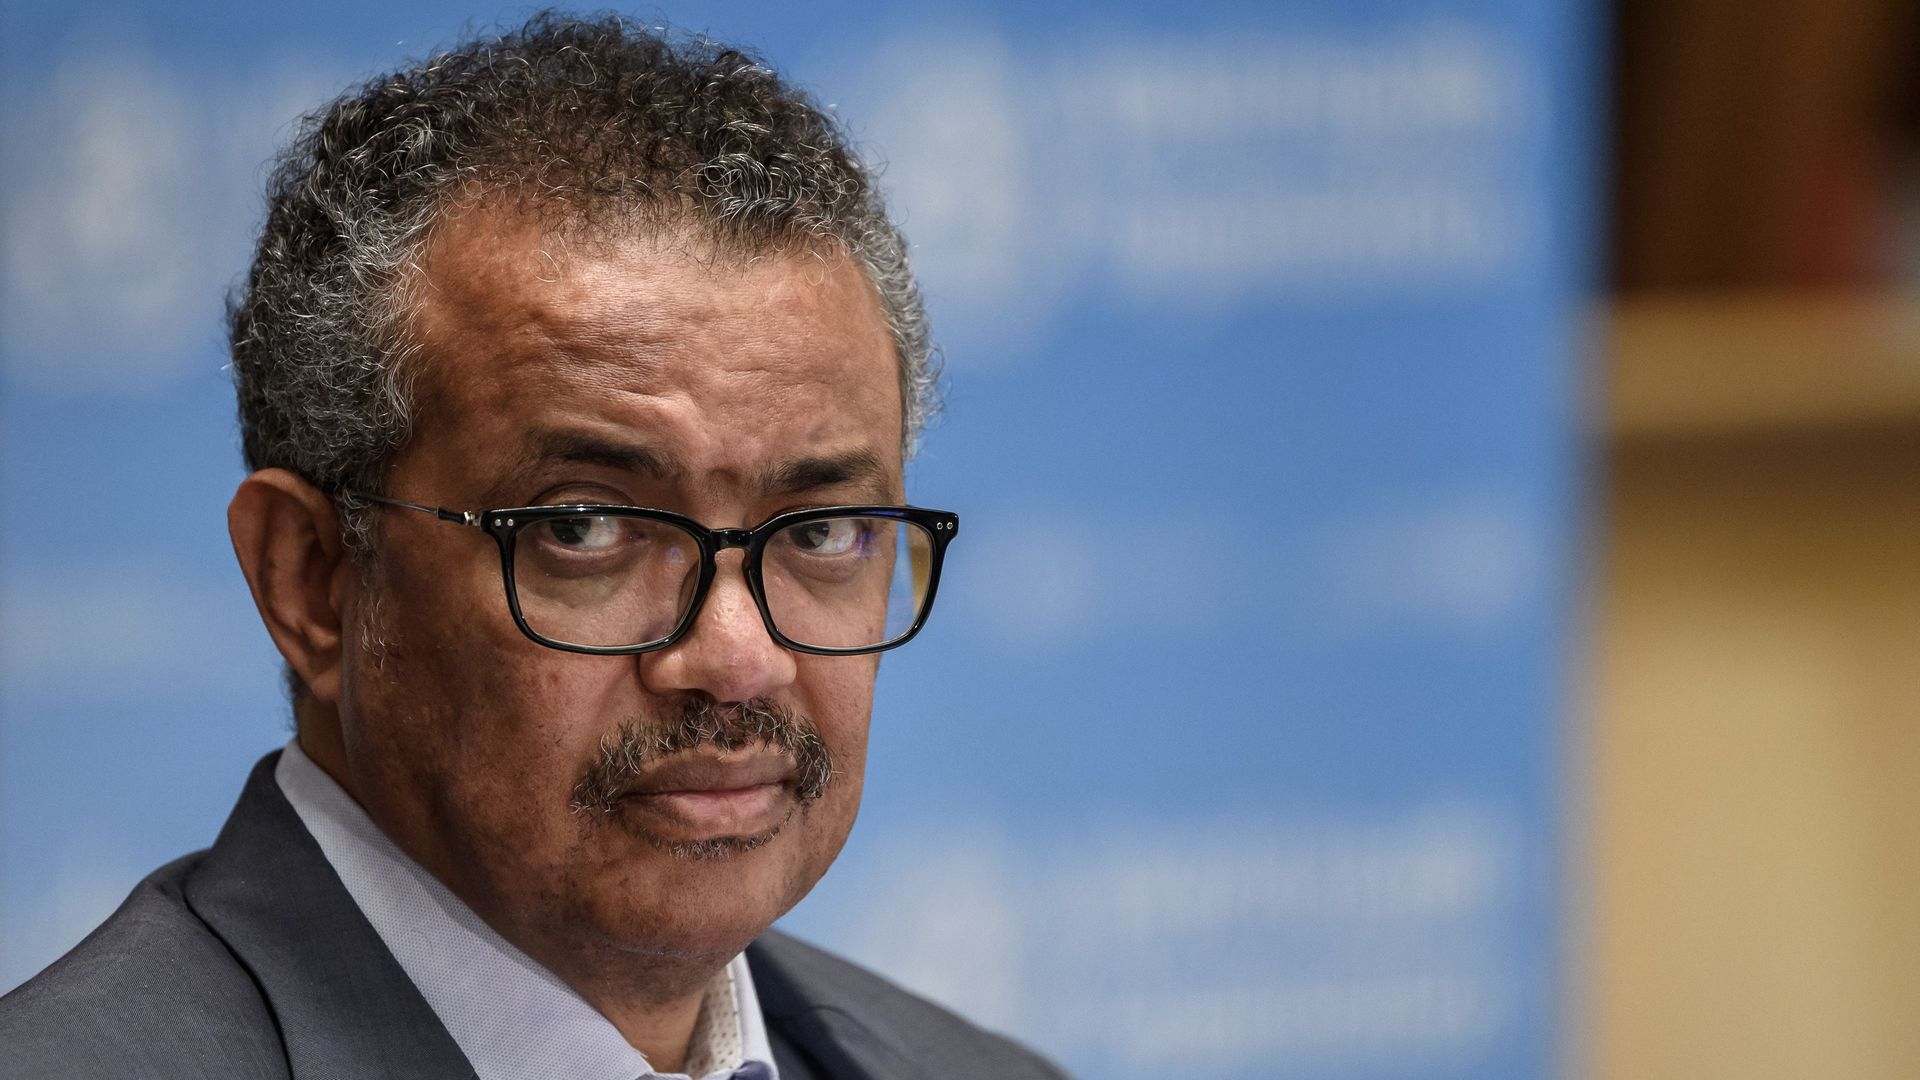 World Health Organization Director-General Tedros Adhanom Ghebreyesus attends a press conference amid the COVID-19 outbreak